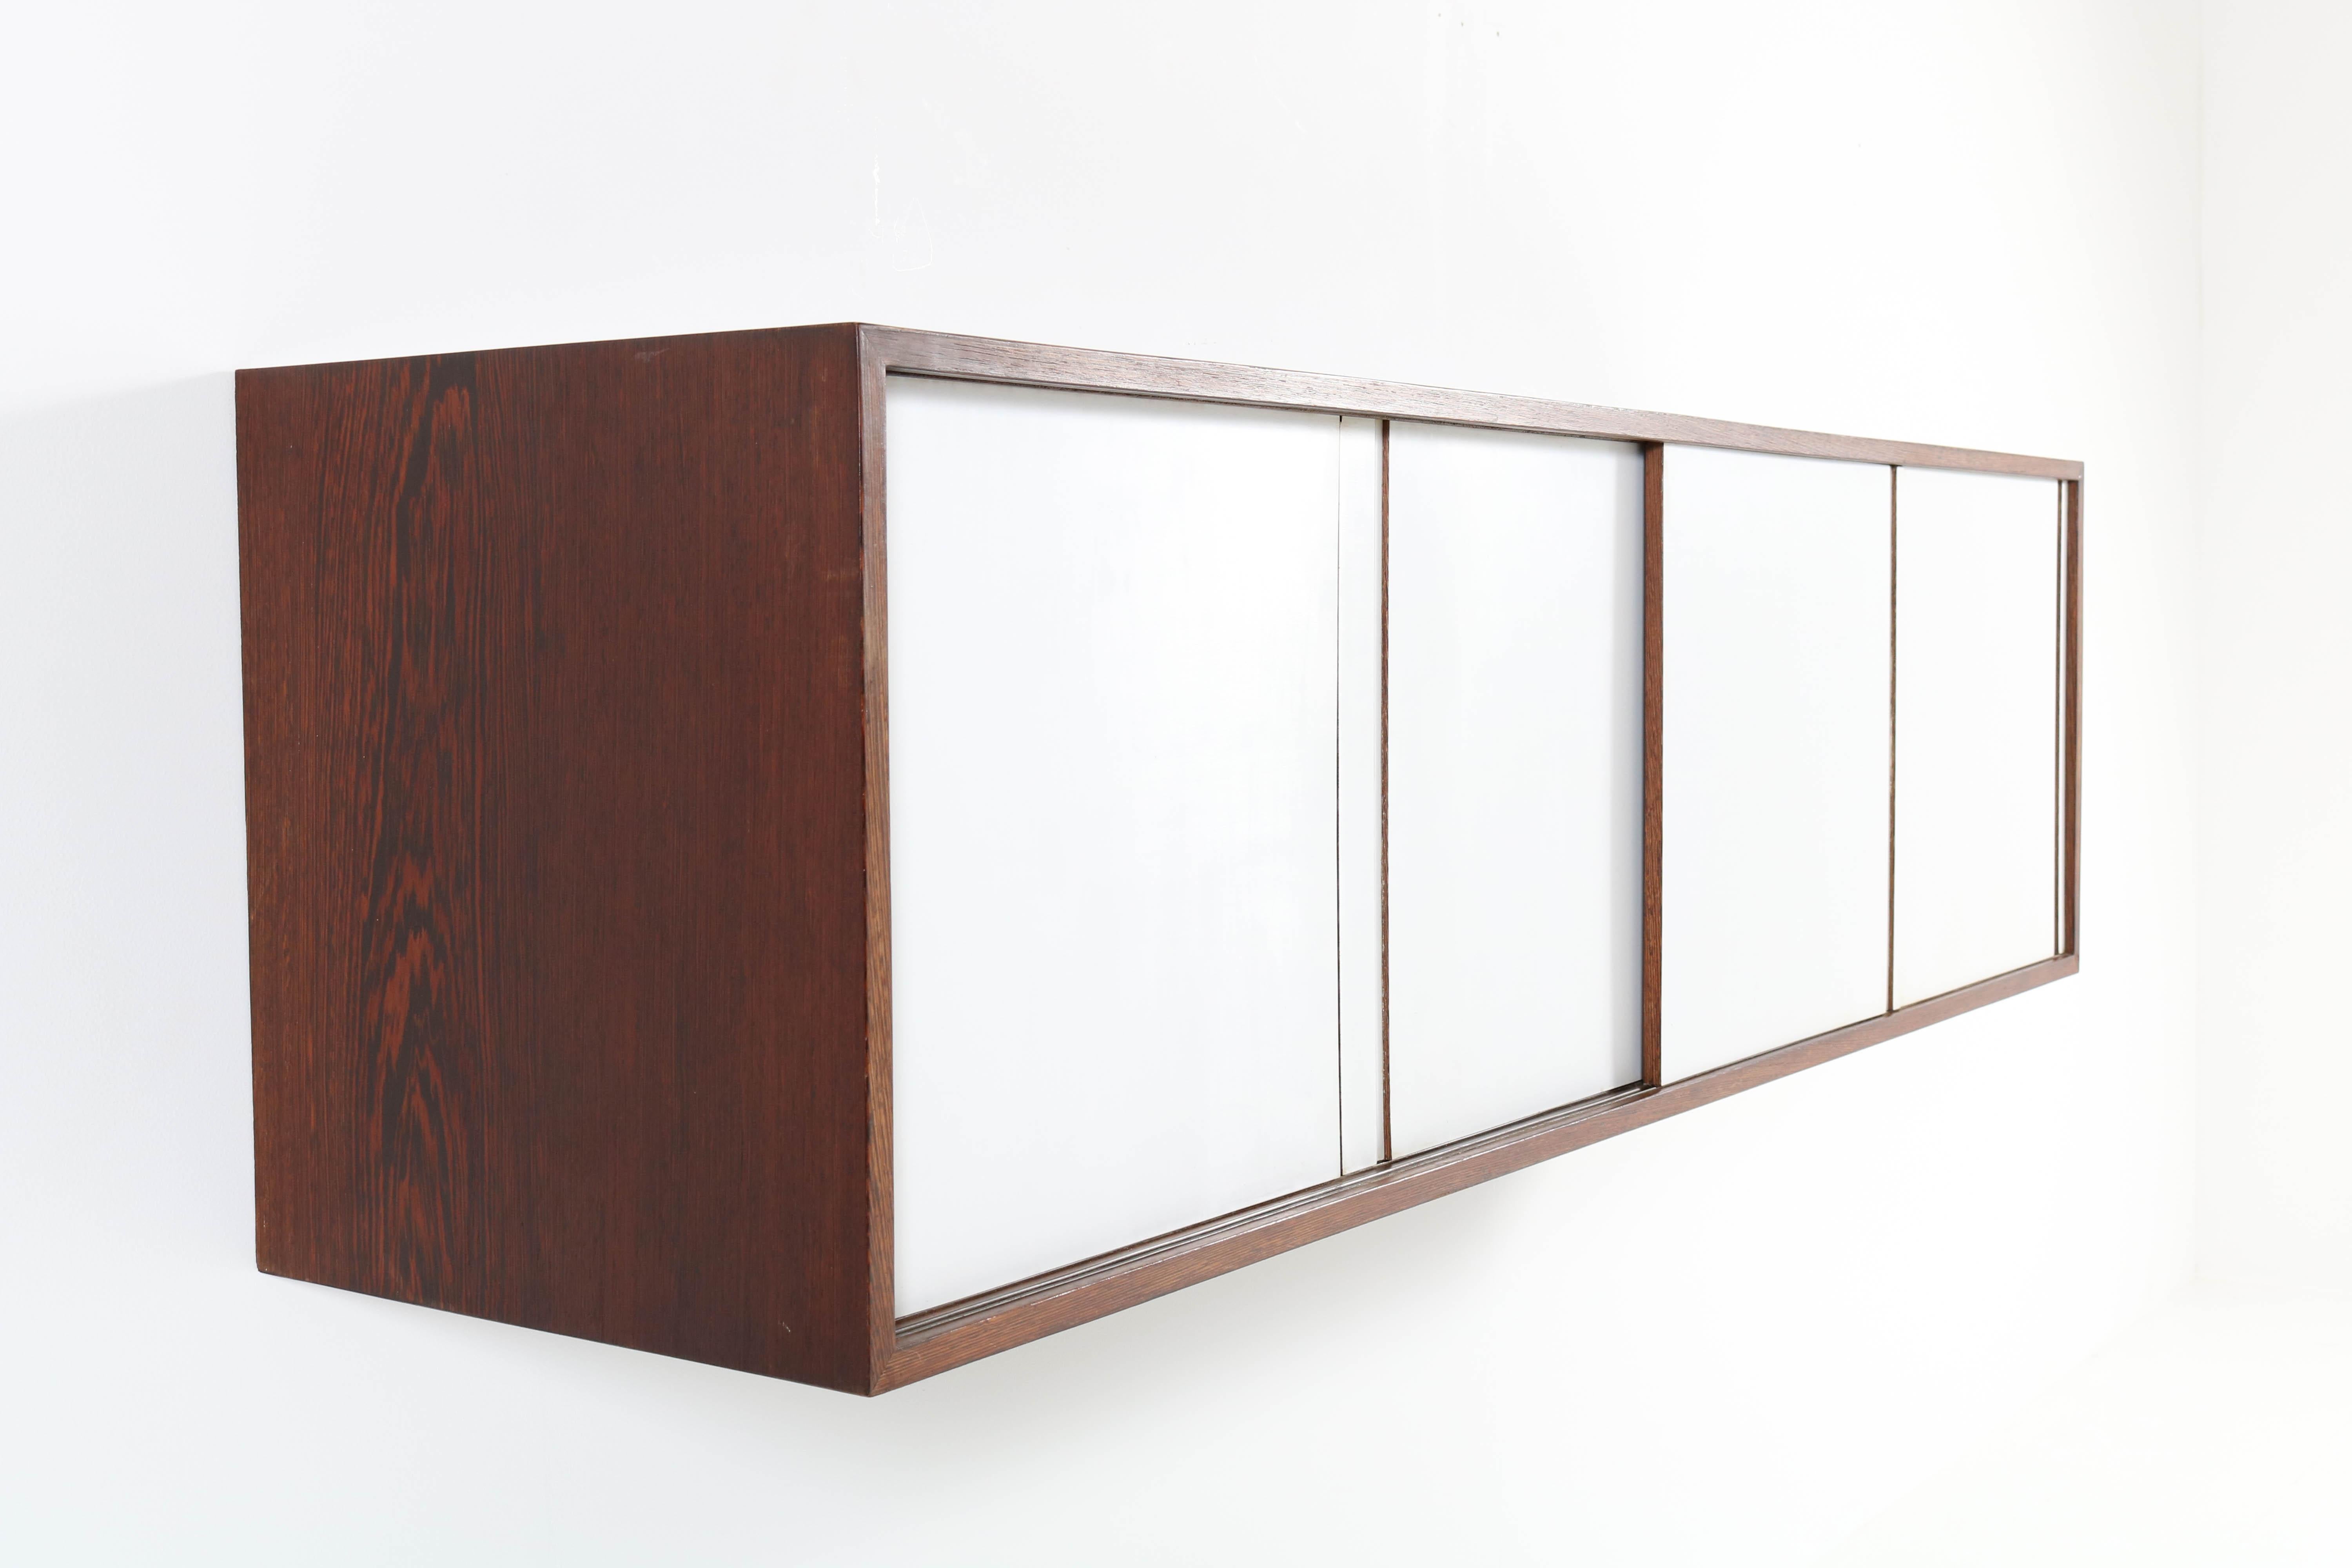 Lacquered Mid-Century Modern Floating Credenza by Martin Visser for 't Spectrum, 1960s